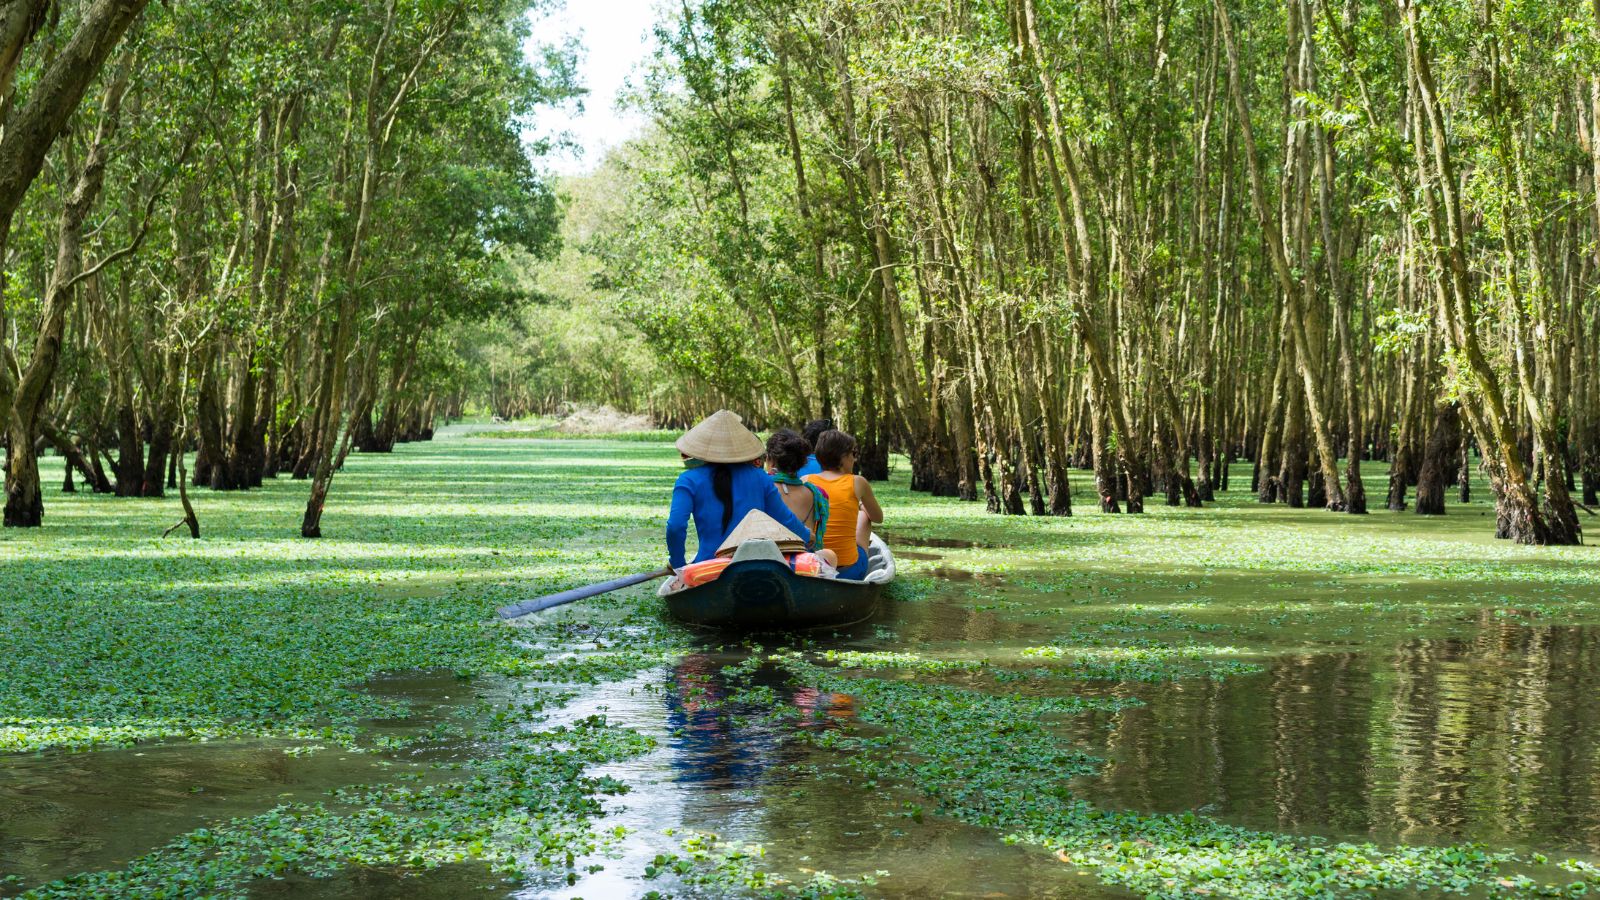 Travel By Boat To Witness The Mekong Delta Scenery